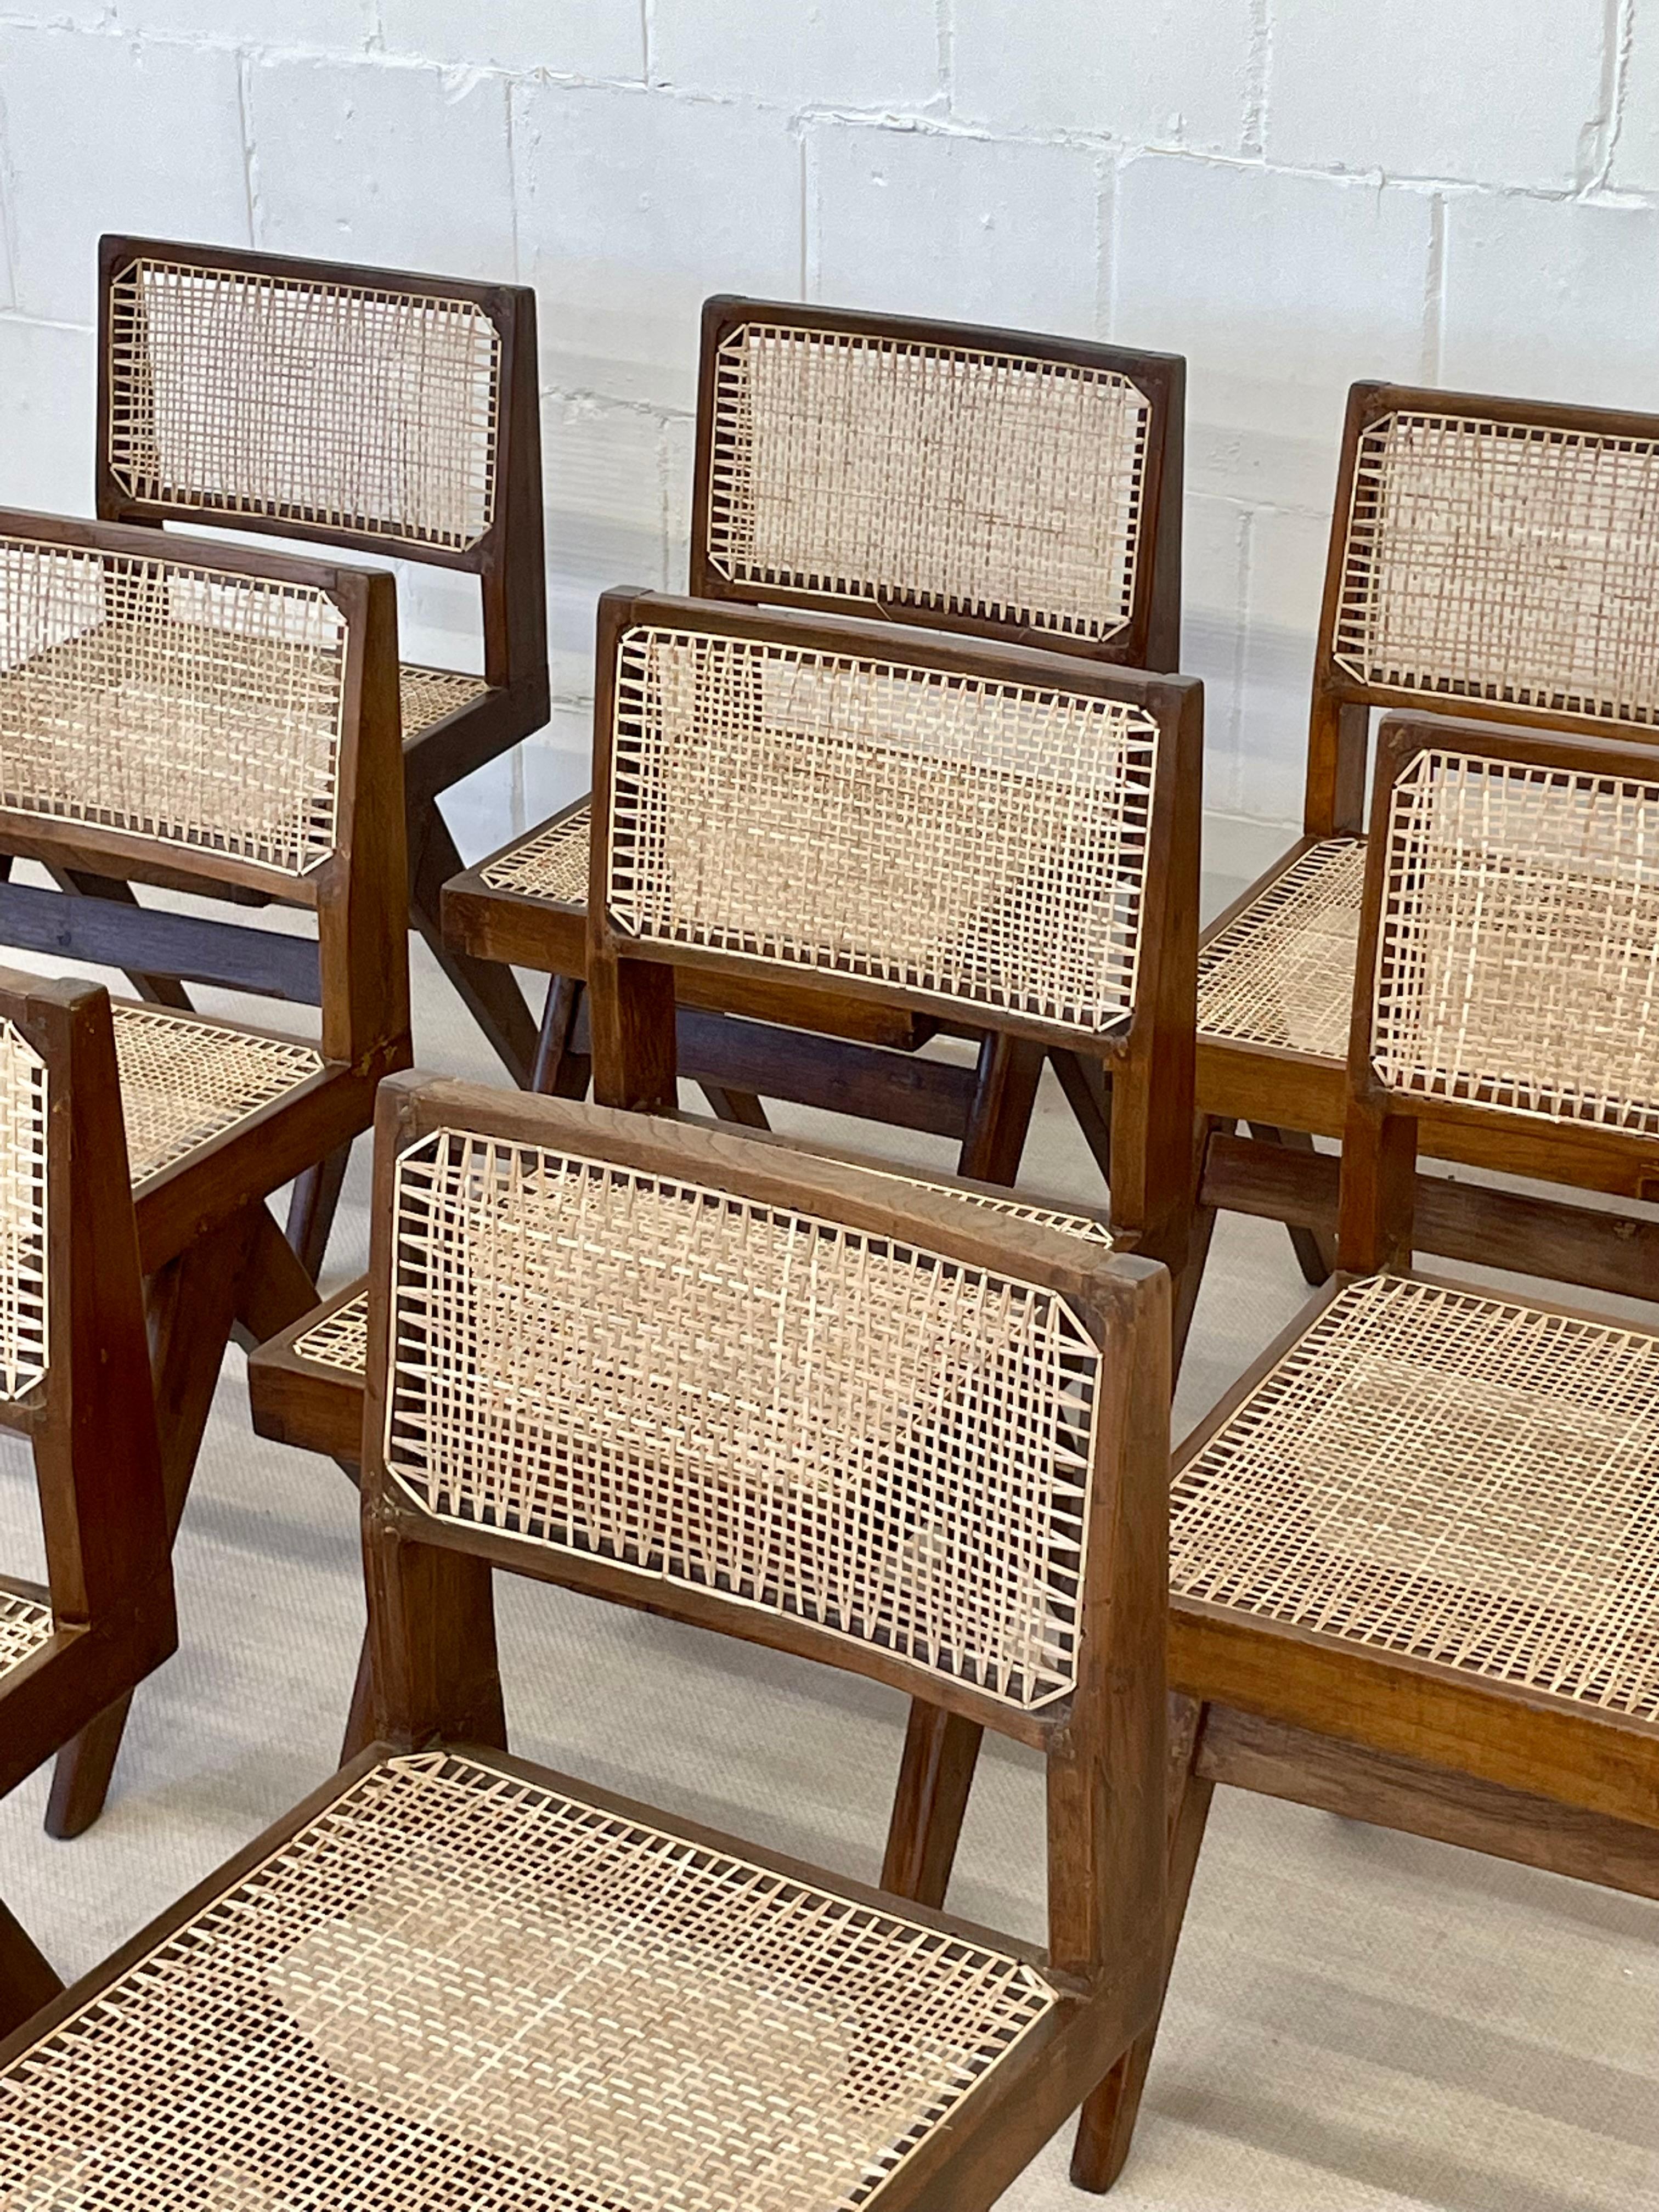 10 Pierre Jeanneret Armless Dining Chairs, Teak, Cane, France/India 1